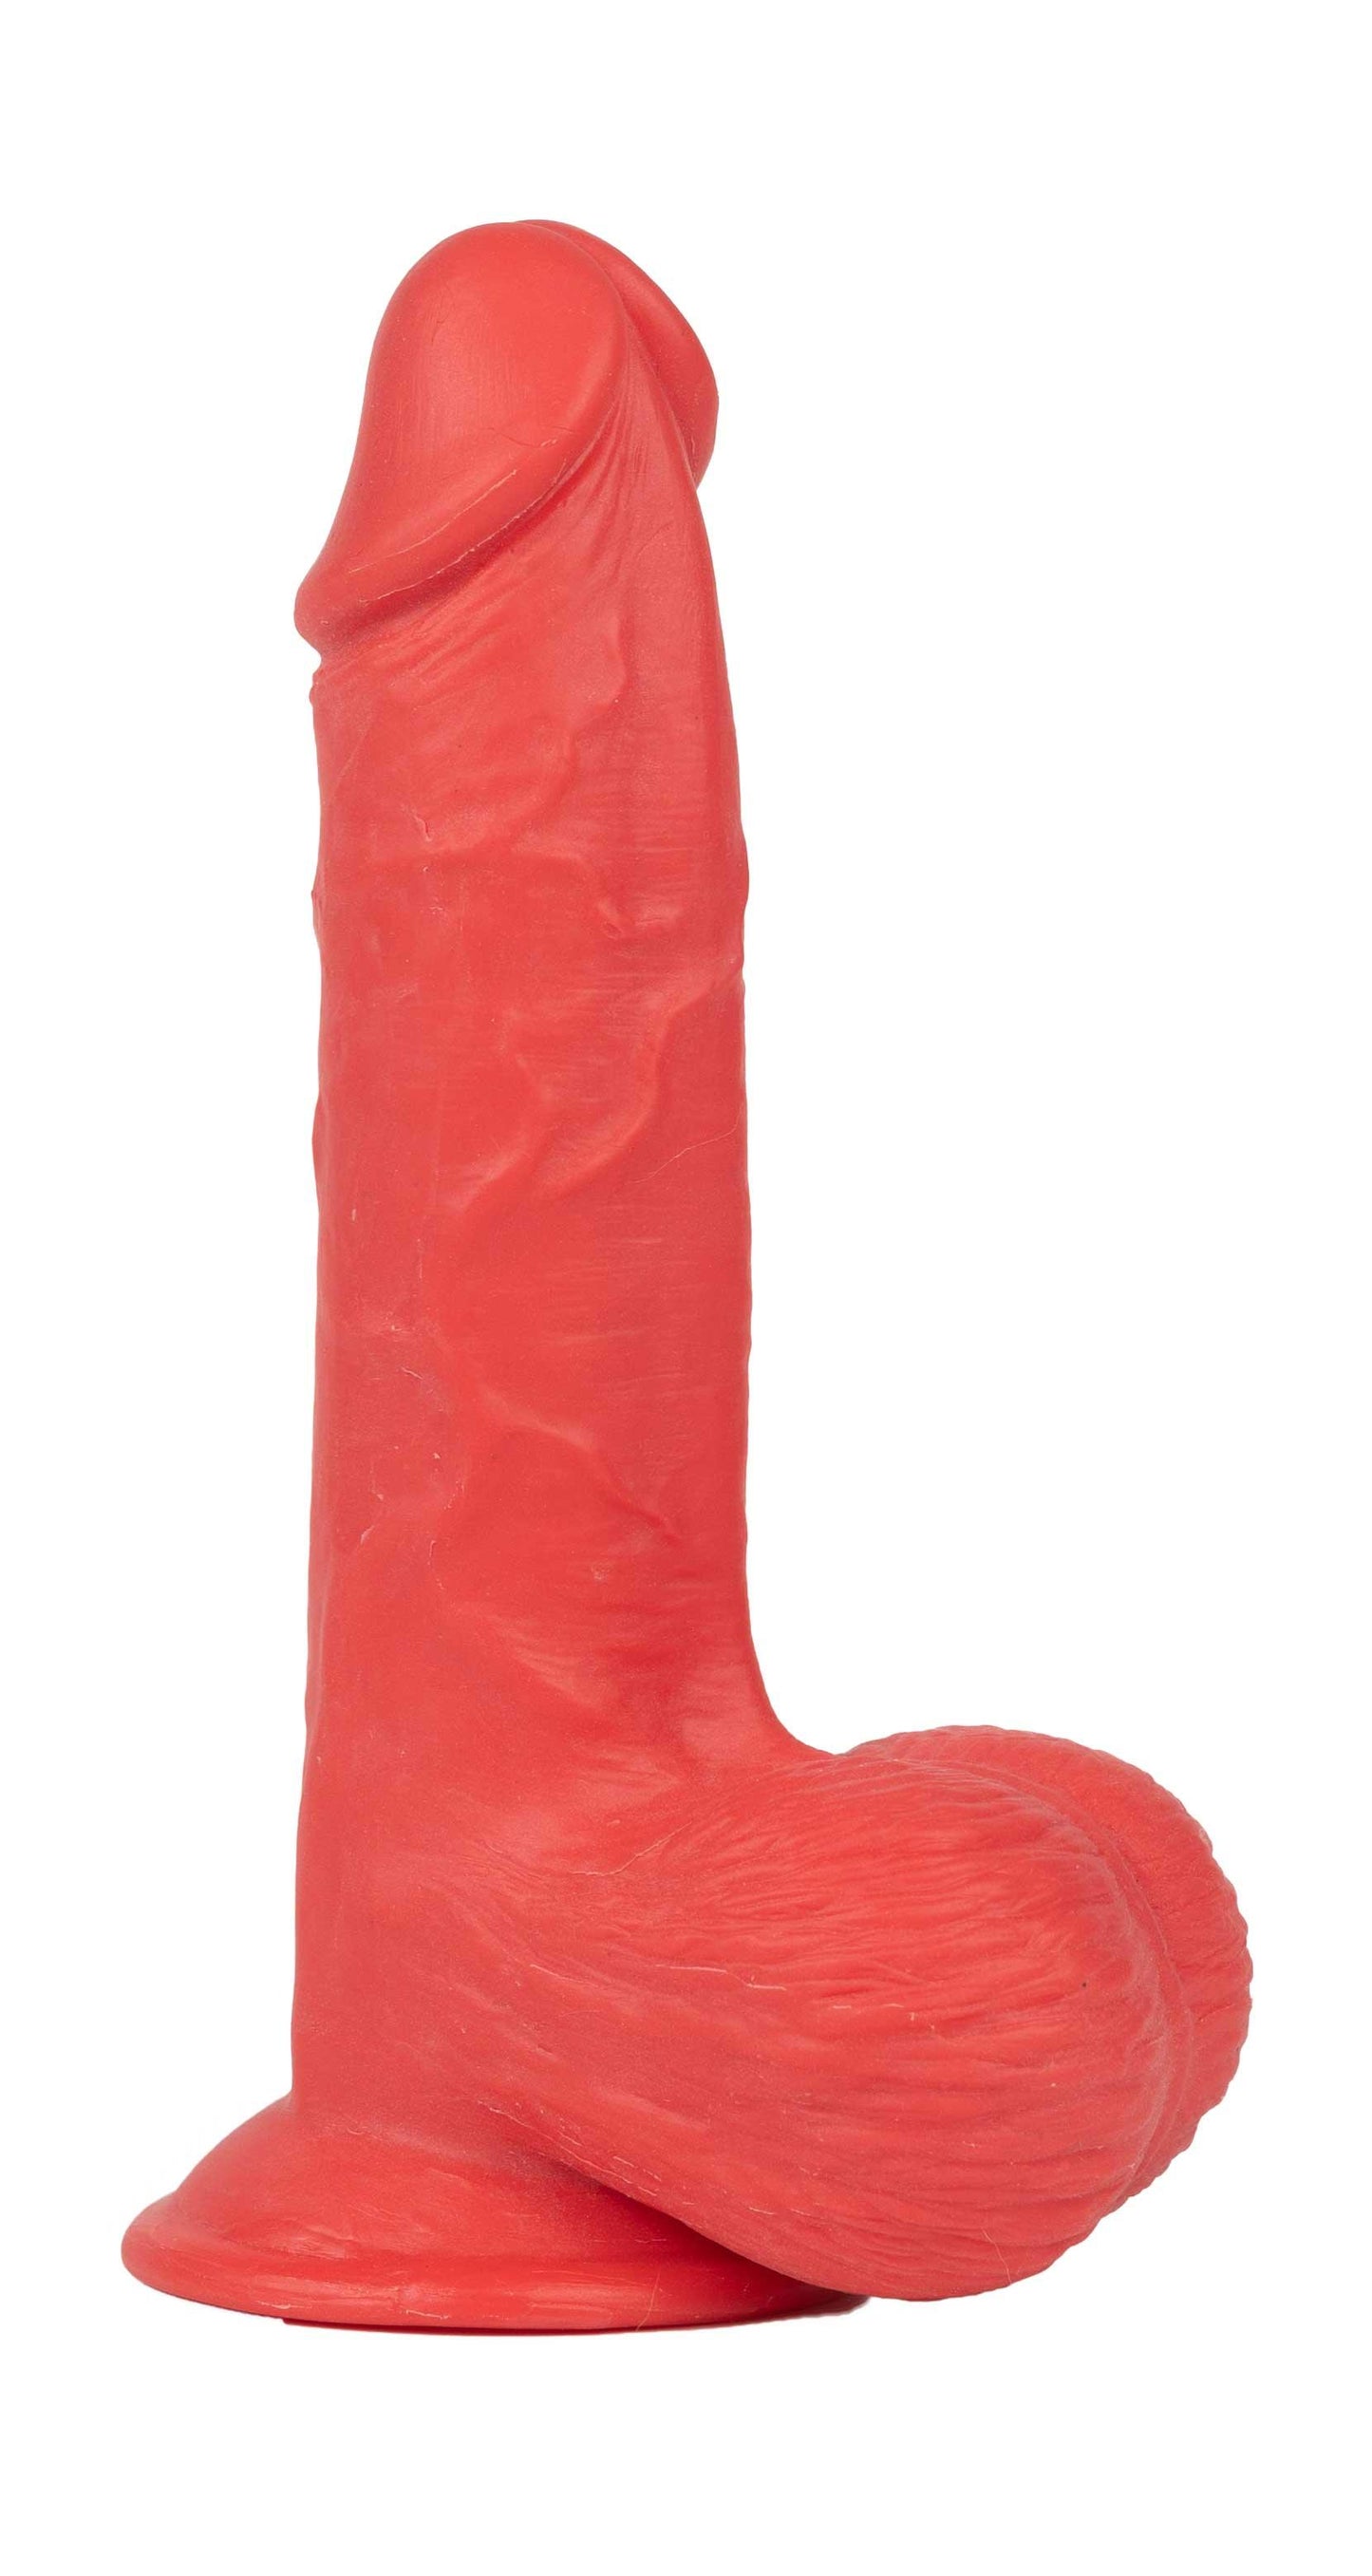 Get Lucky Ms. Ruby 7.5 Inch Dildo - Red - My Sex Toy Hub